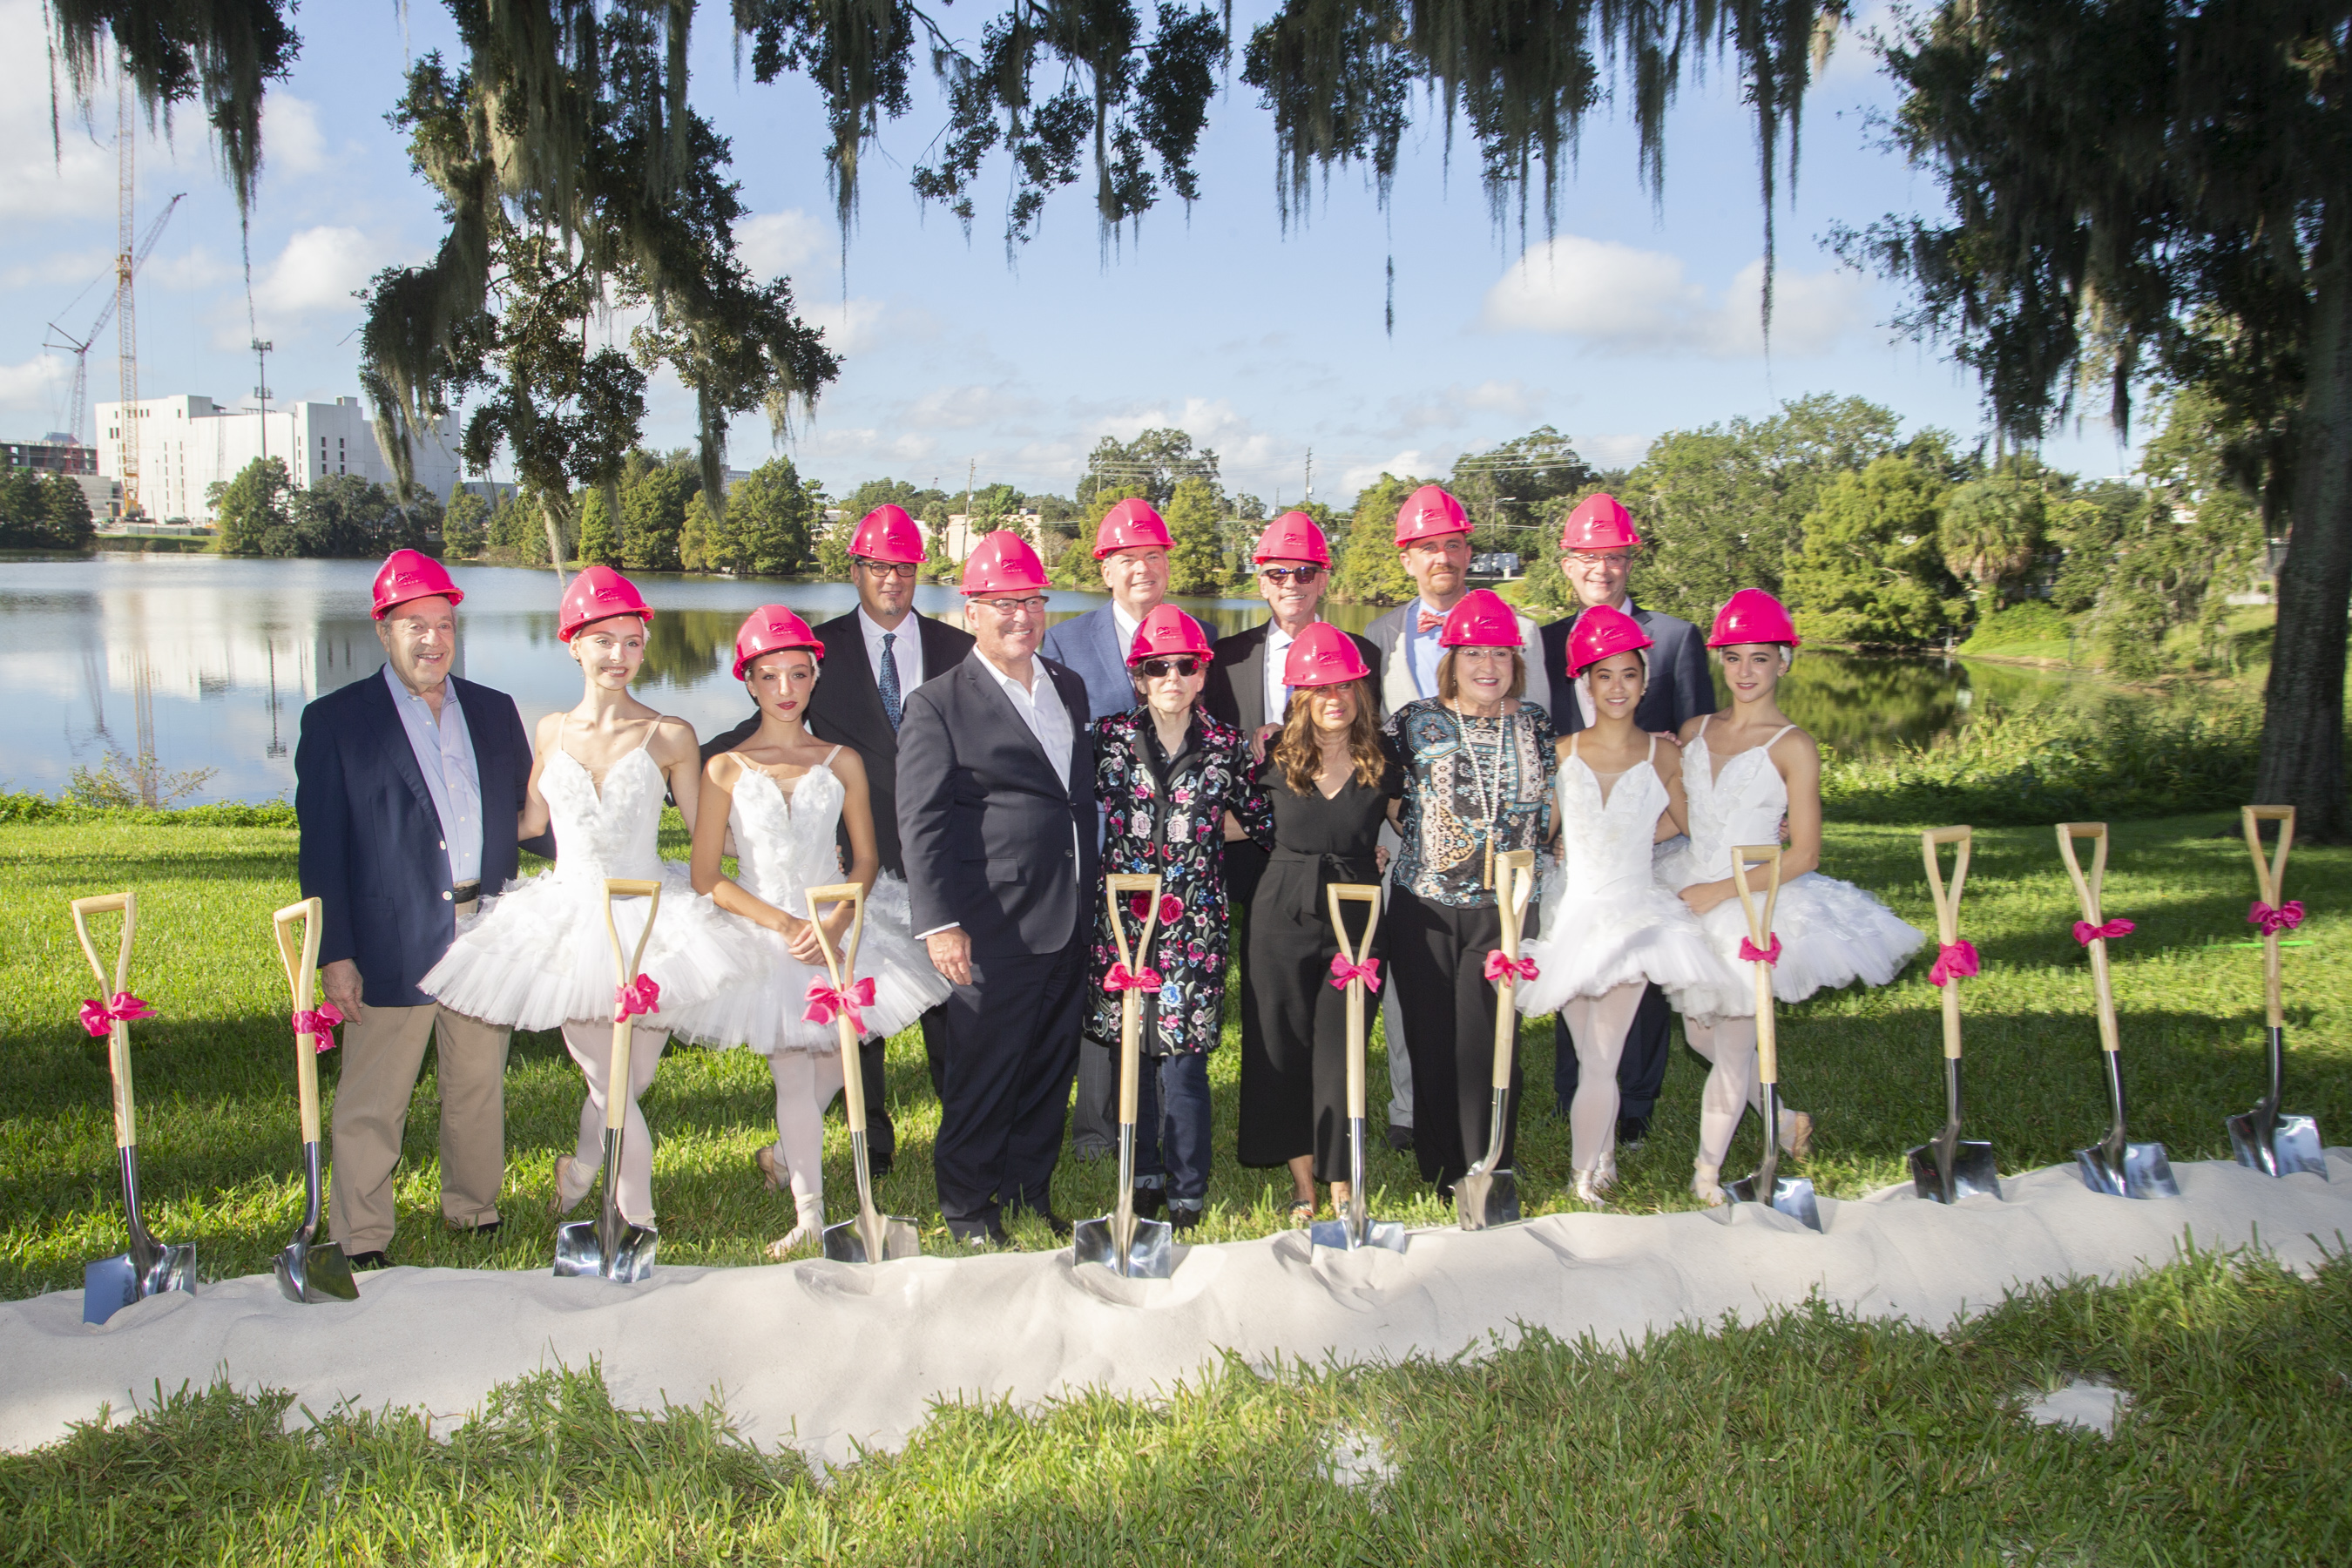 Mayor Jacobs, Orlando ballet leaders and ballerinas at a groundbreaking ceremony holding shovels